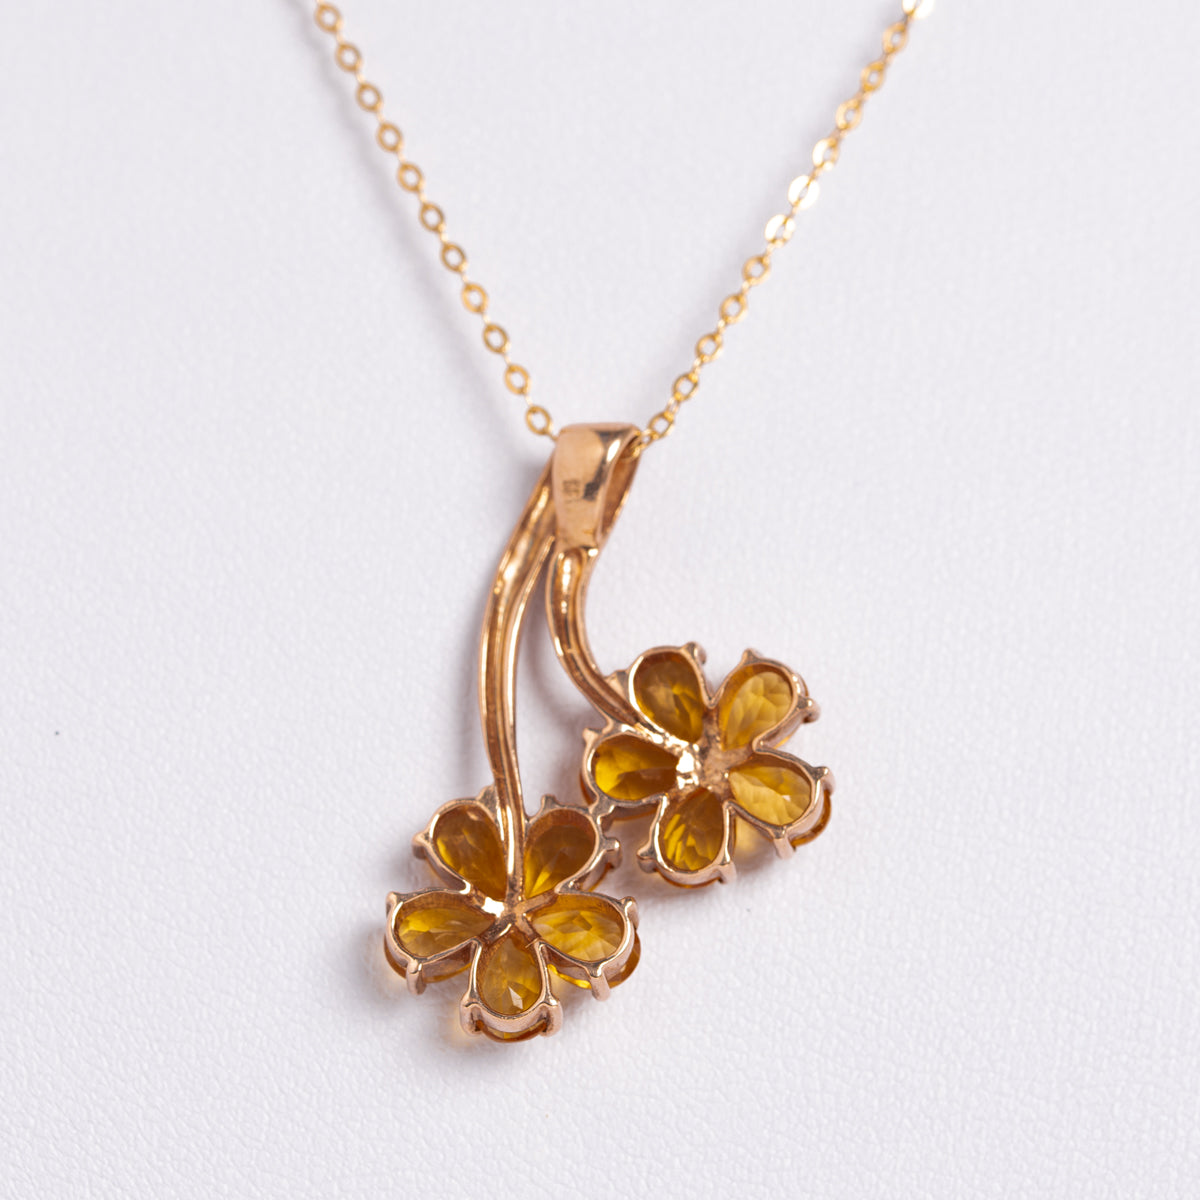 Citrine Flowers With Stems Design Pendant 9ct Gold With Fine 14K Gold Chain  (A1389)